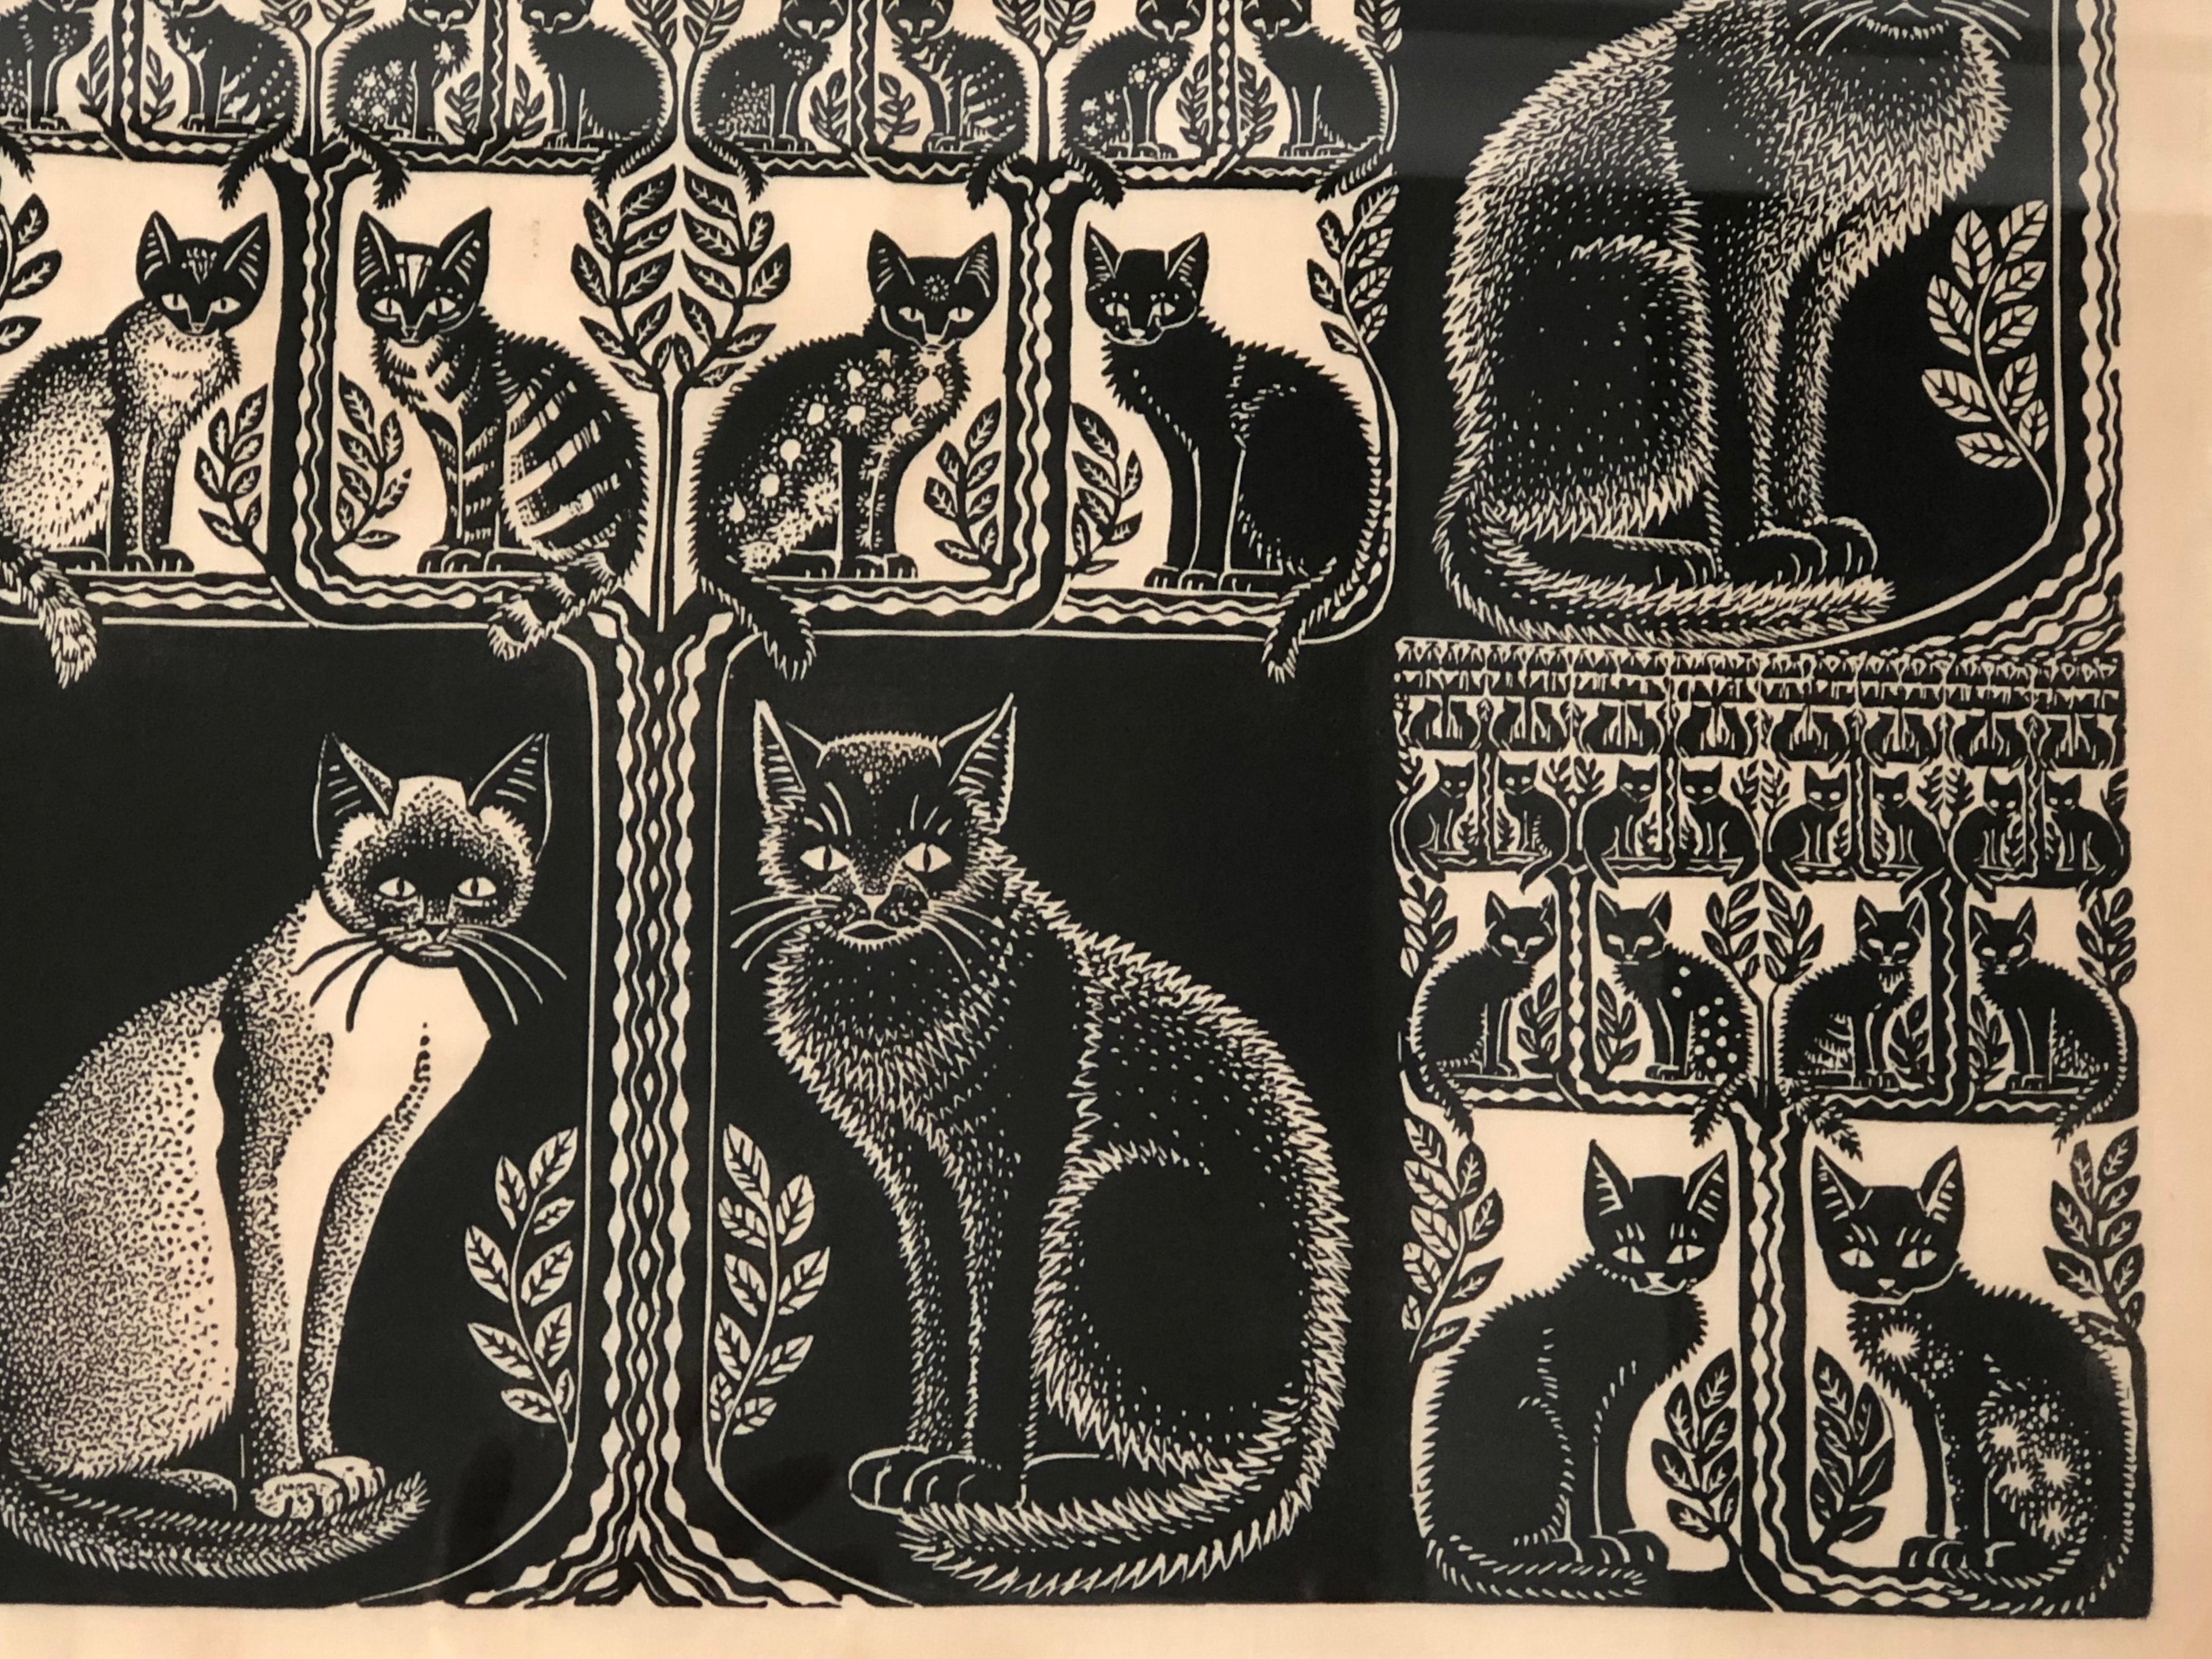 Hand-Crafted Folly Cove Designers Cat and Kitten Themed Hand Block Print